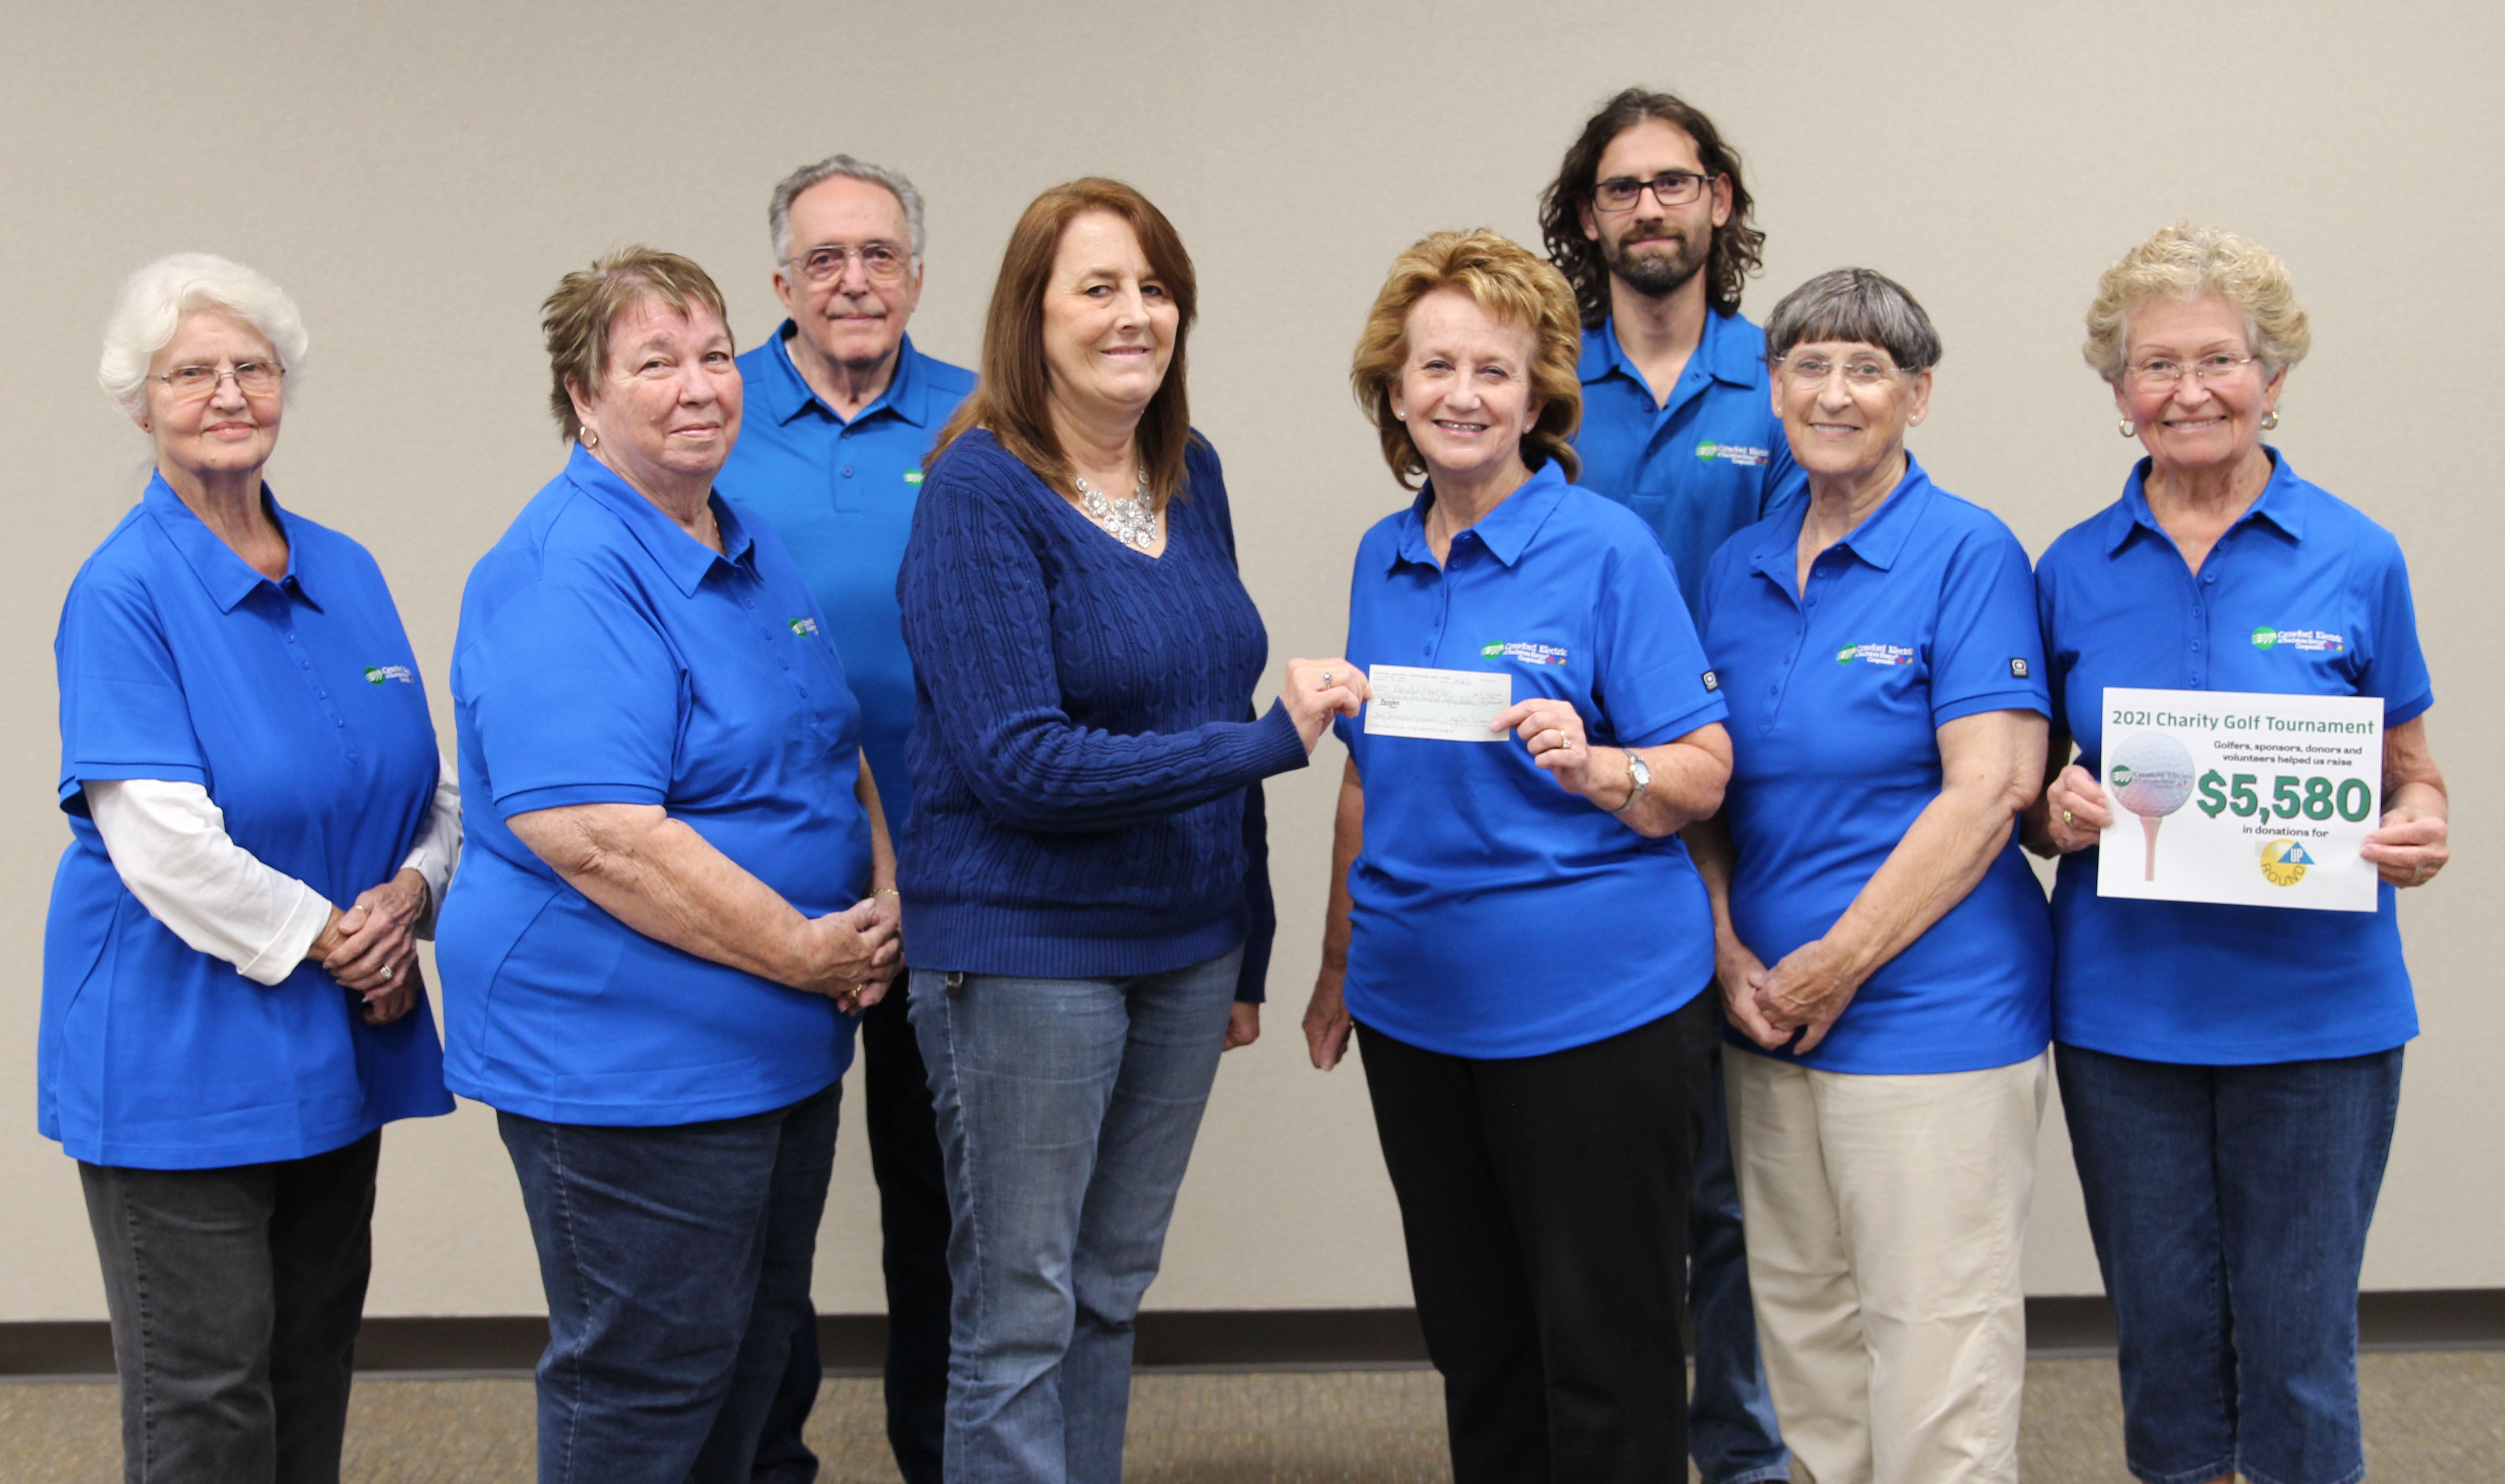 Members of Charitable Trust Board receive donation check from golf tournament